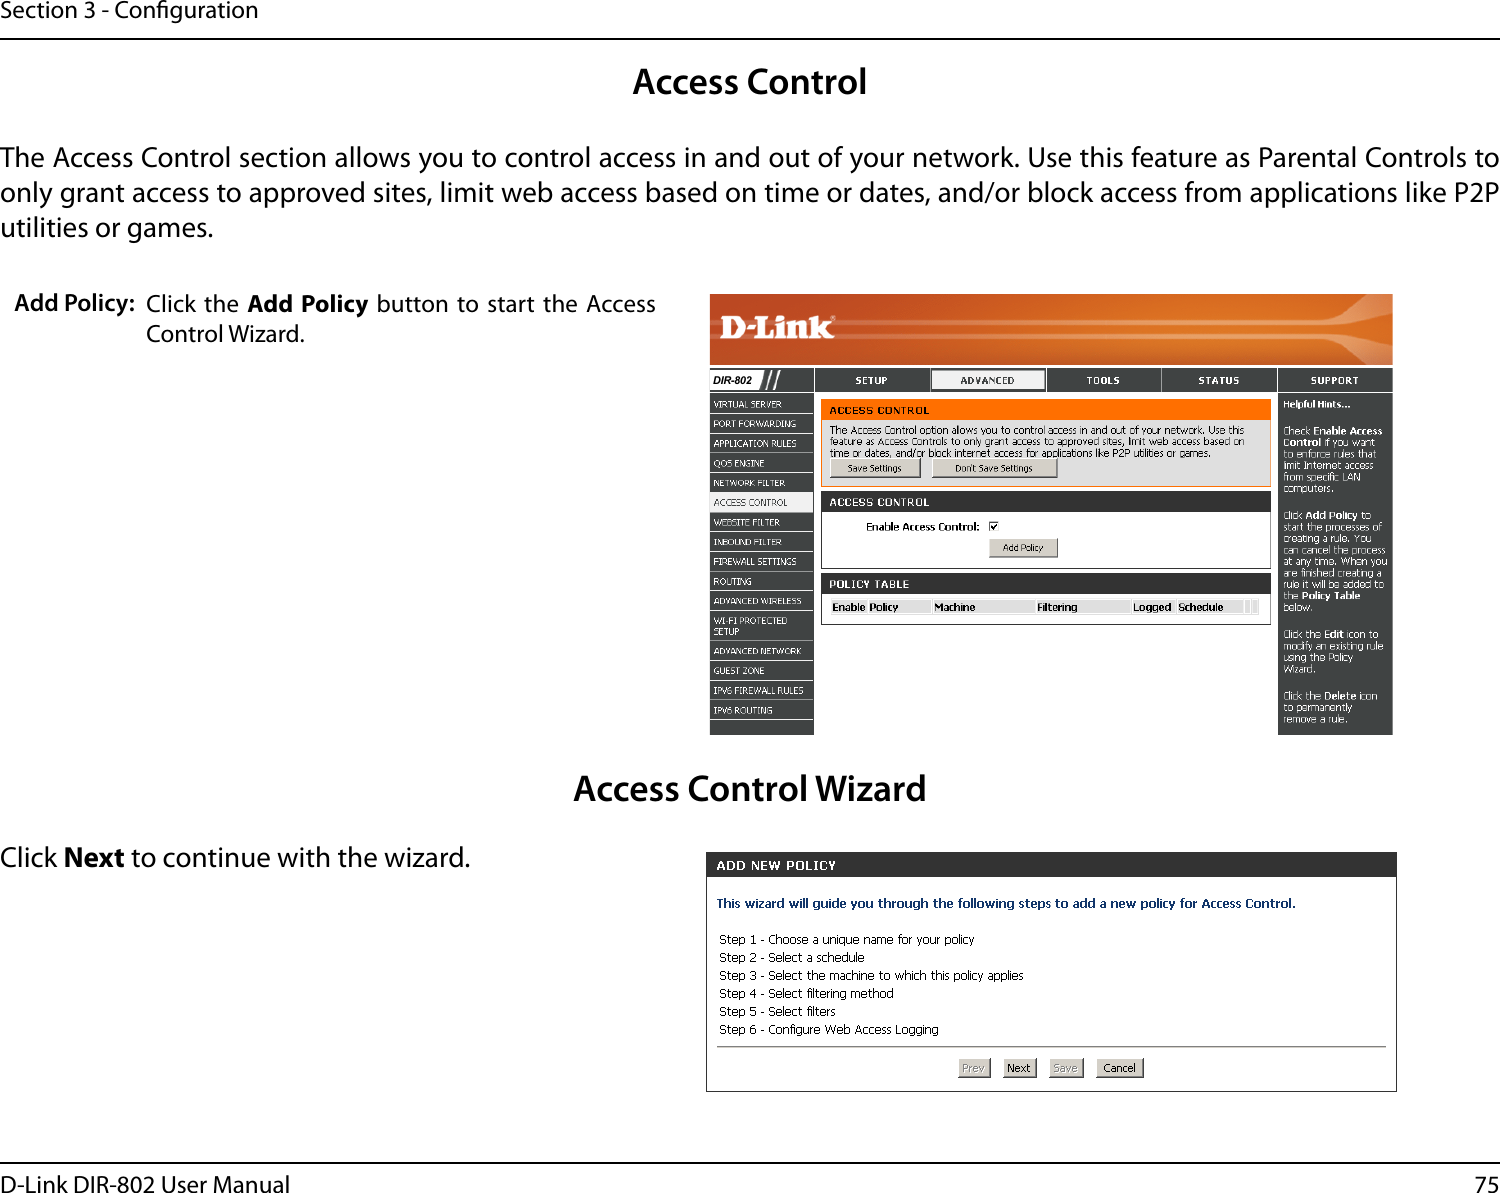 75D-Link DIR-802 User ManualSection 3 - CongurationAccess ControlClick the  Add Policy button to start the  Access Control Wizard. Add Policy:The Access Control section allows you to control access in and out of your network. Use this feature as Parental Controls to only grant access to approved sites, limit web access based on time or dates, and/or block access from applications like P2P utilities or games.Click Next to continue with the wizard.Access Control WizardDIR-802